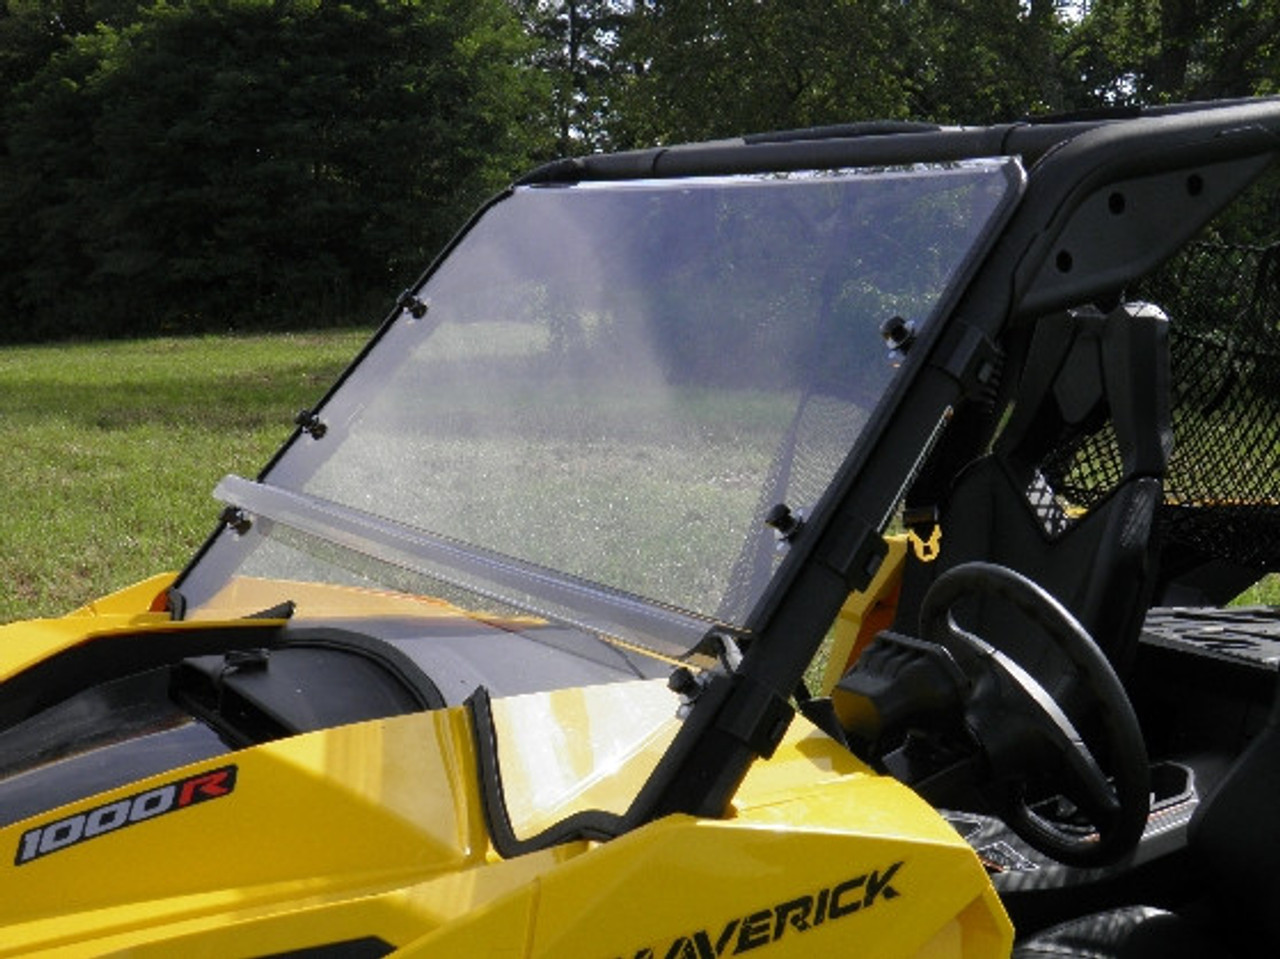 3 Star side x side can-am maverick and max windshield front angle view